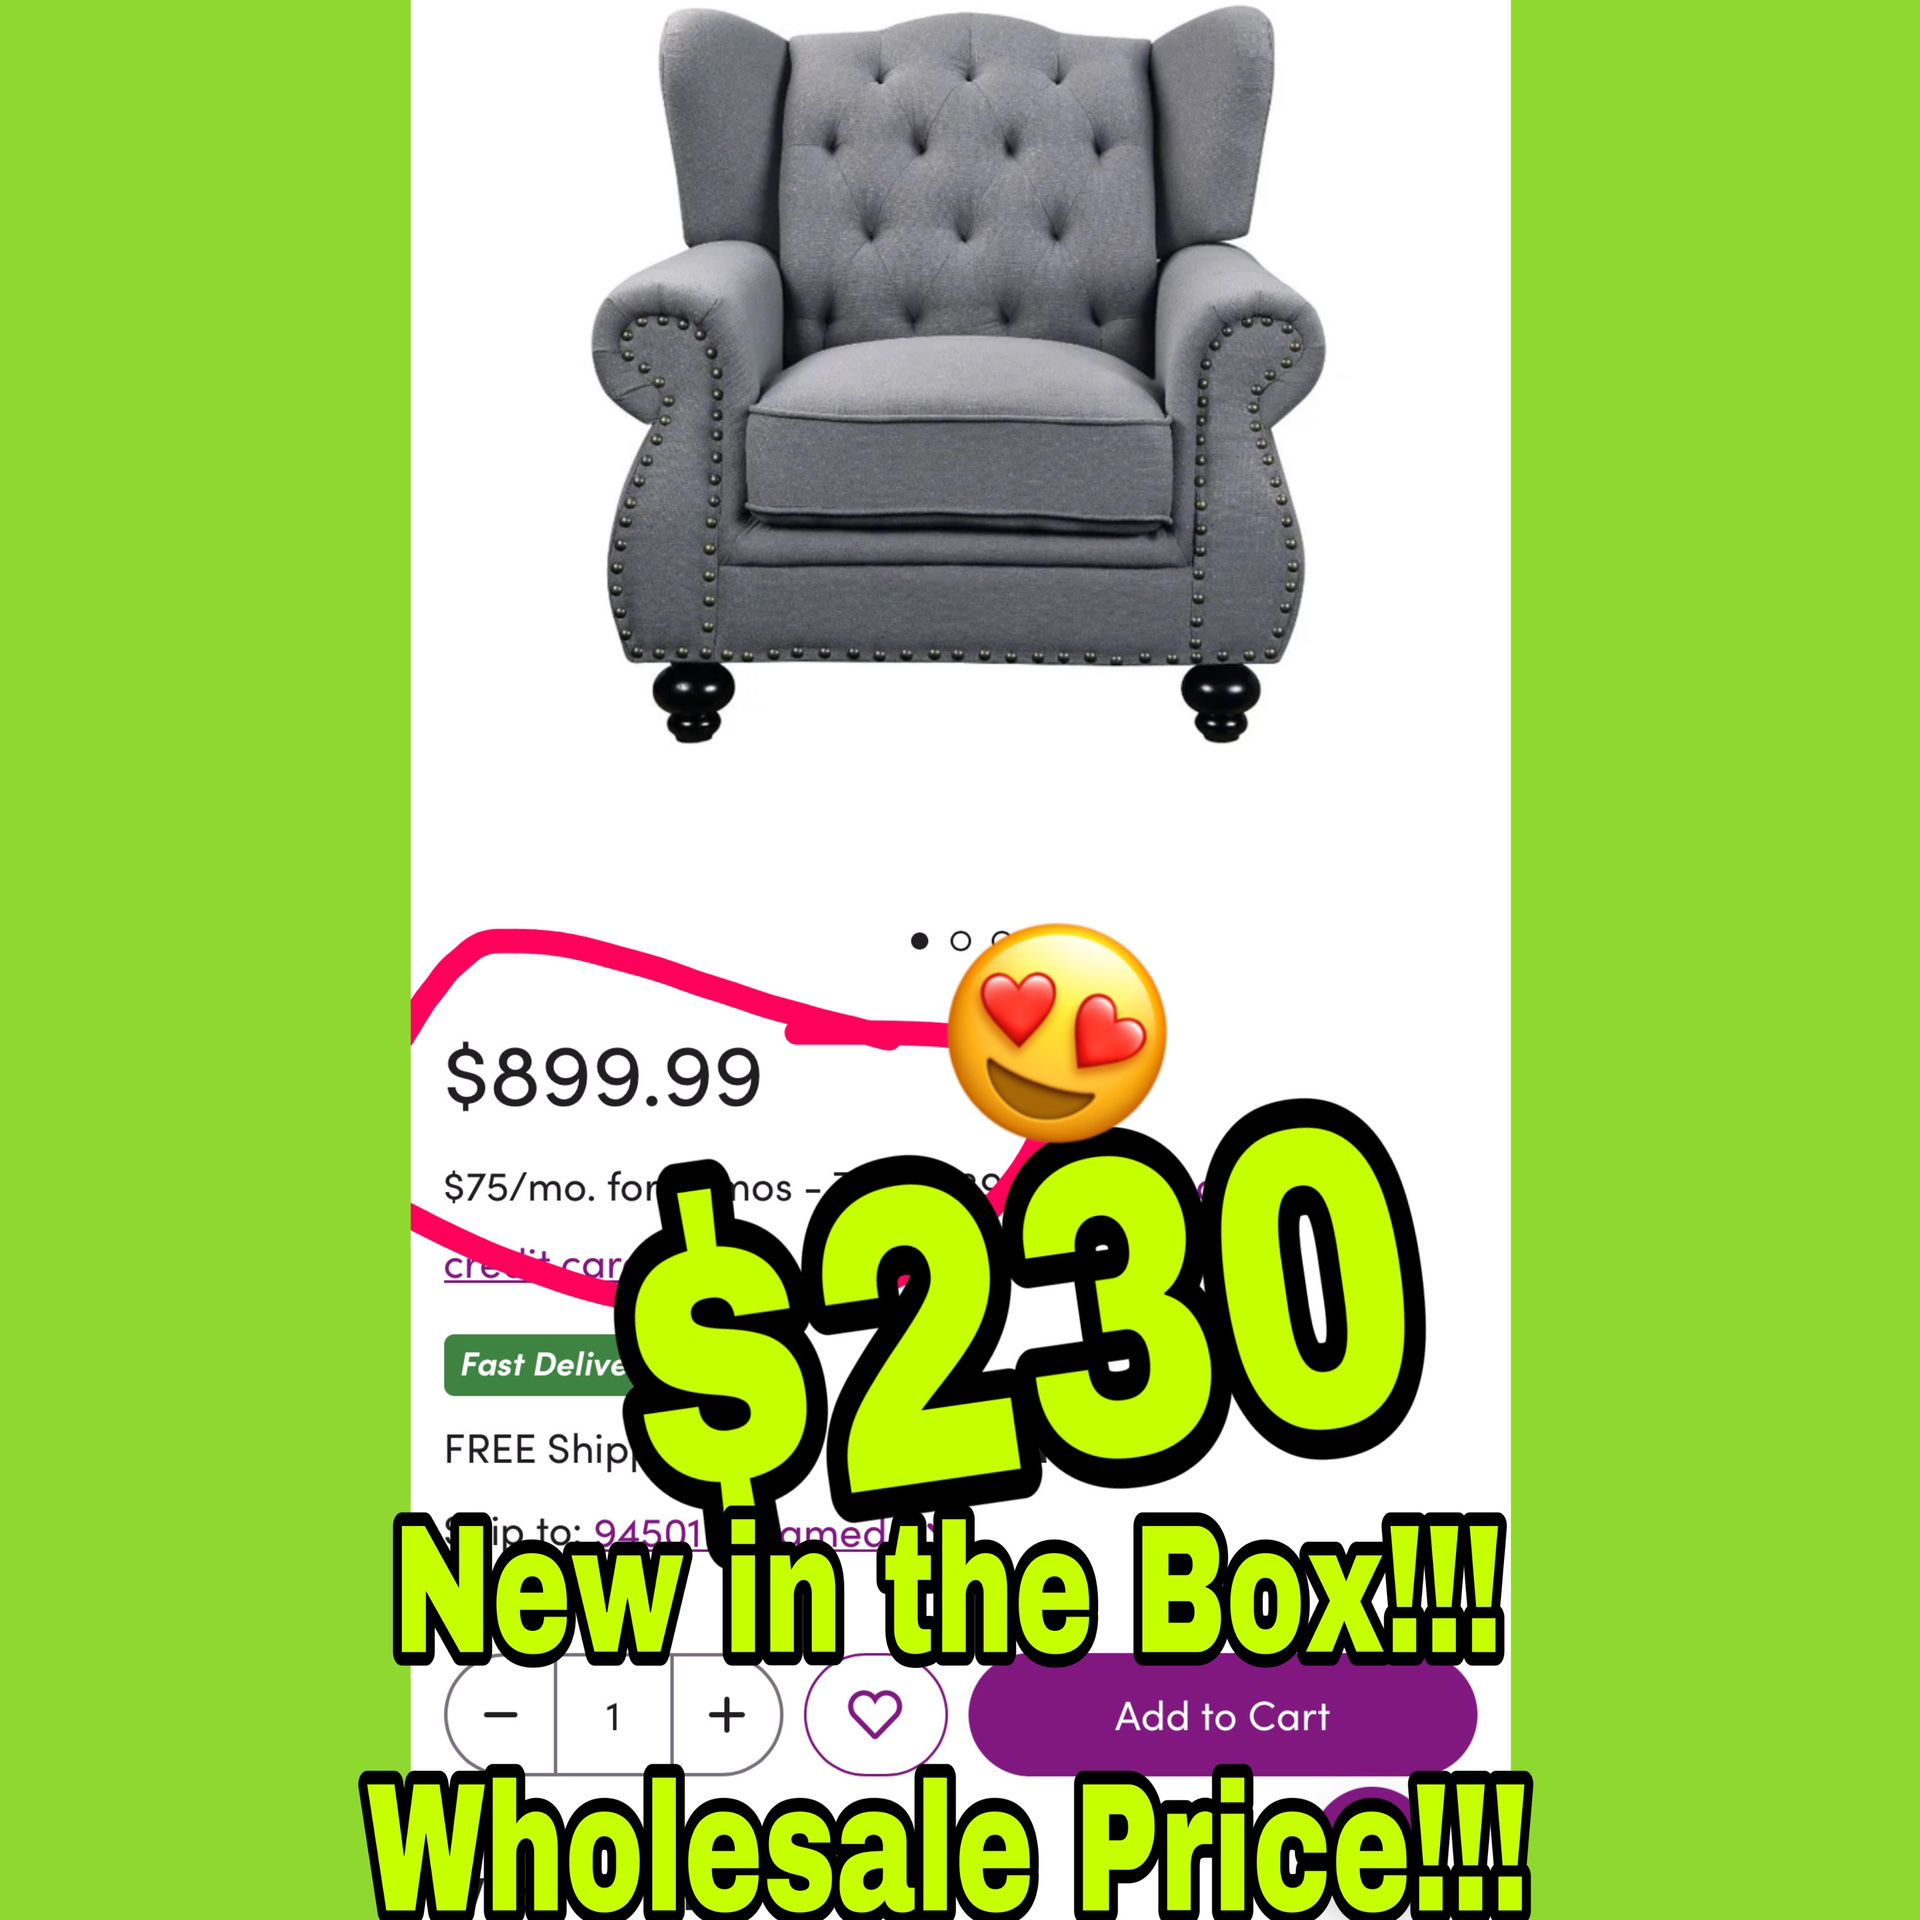 Beautiful New Tufted Wingback Chair Only $230!!! Original Price $900!!!